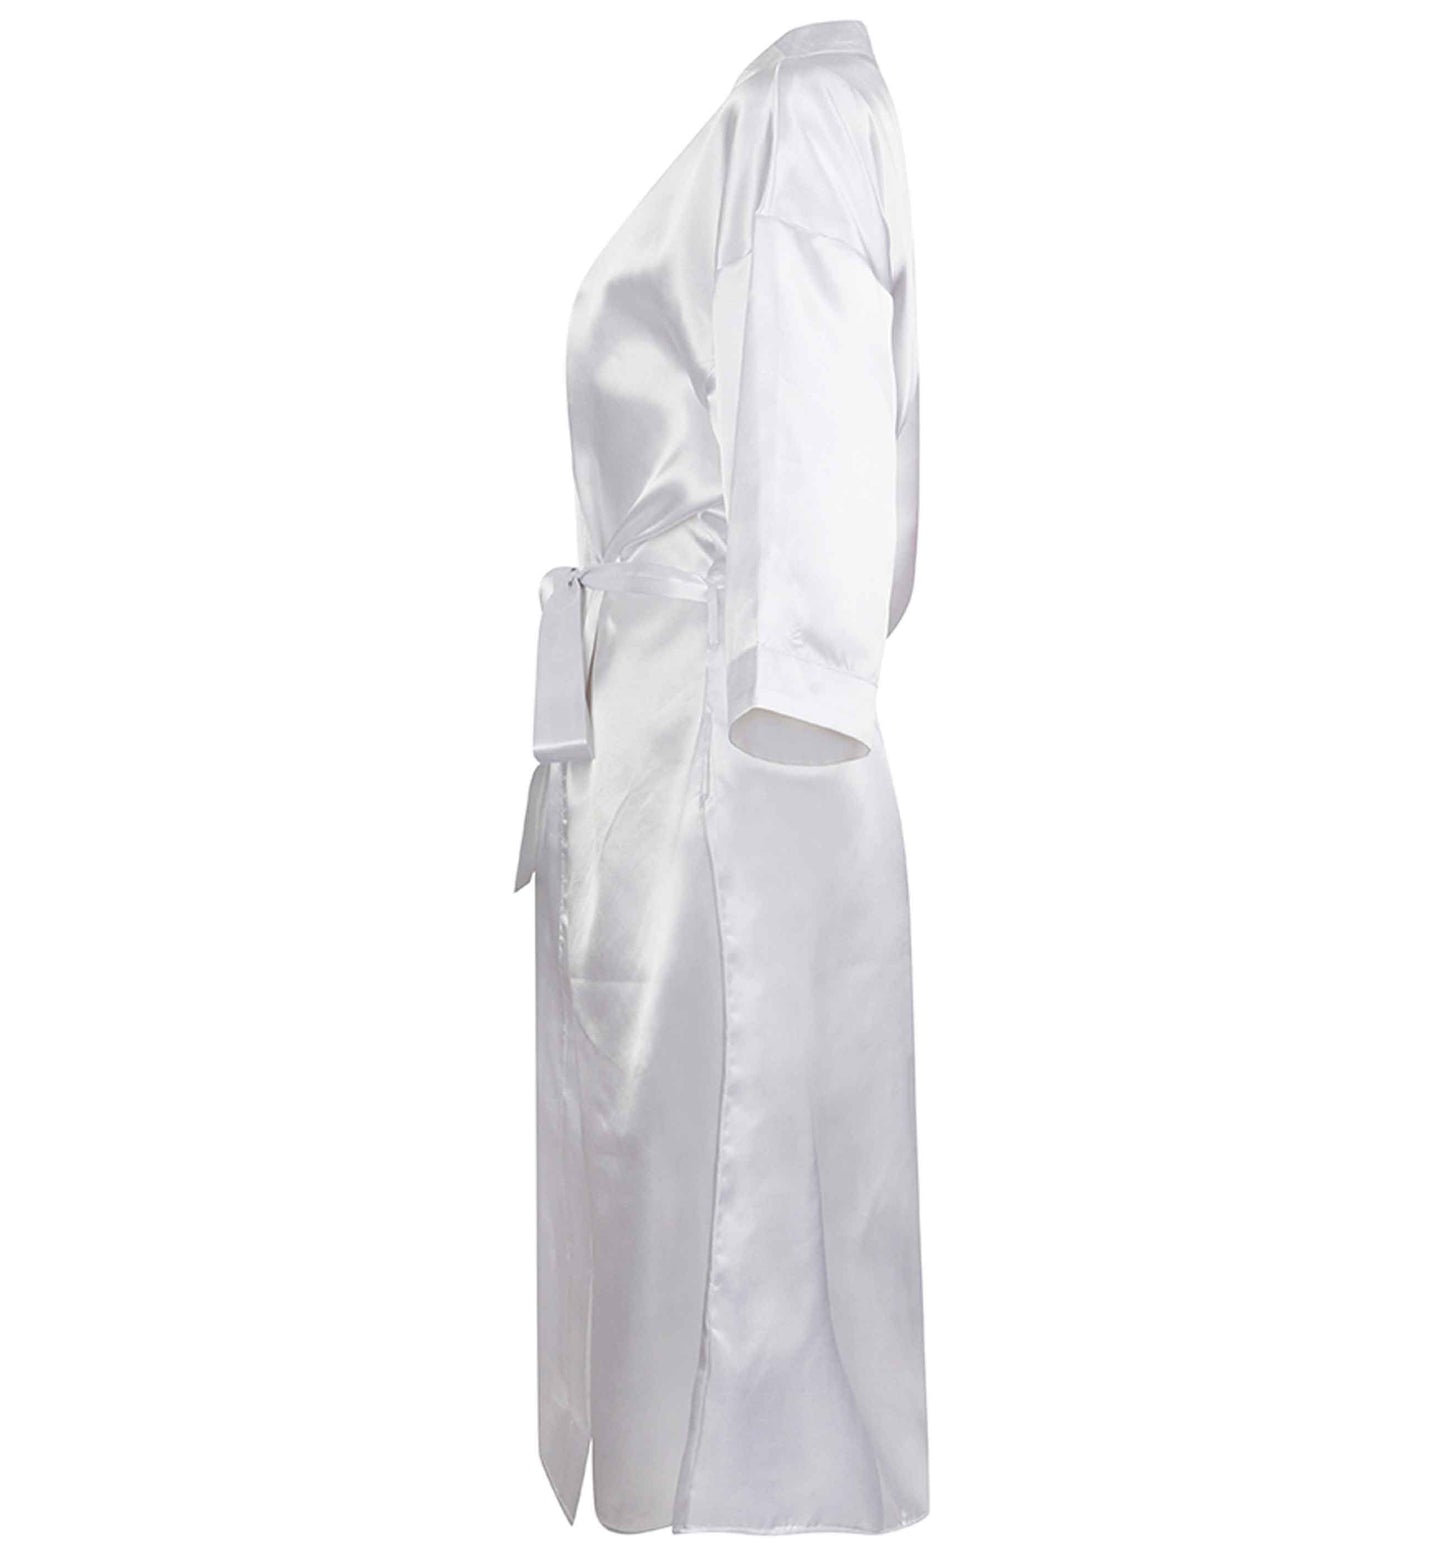 Married at sea blue anchors |  8-18 | Kimono style satin robe | Ladies dressing gown